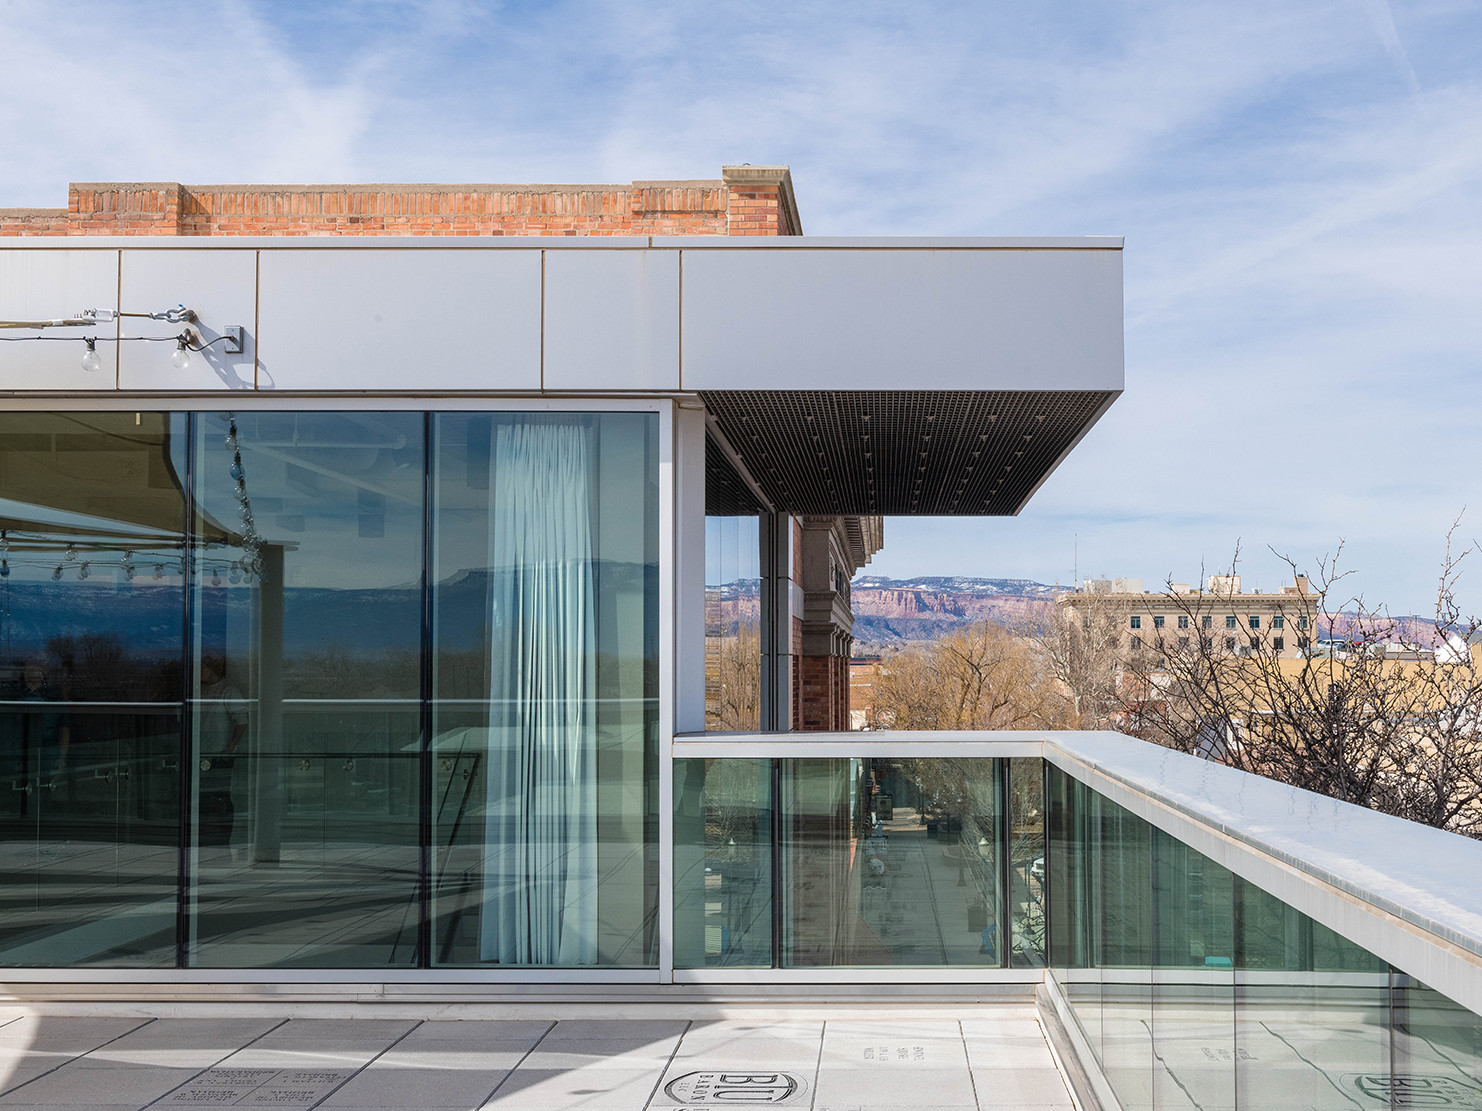 Glass and steel rooftop deck with a glass balustrade and steel cap. Views of adjacent brick building and the Rocky Mountains